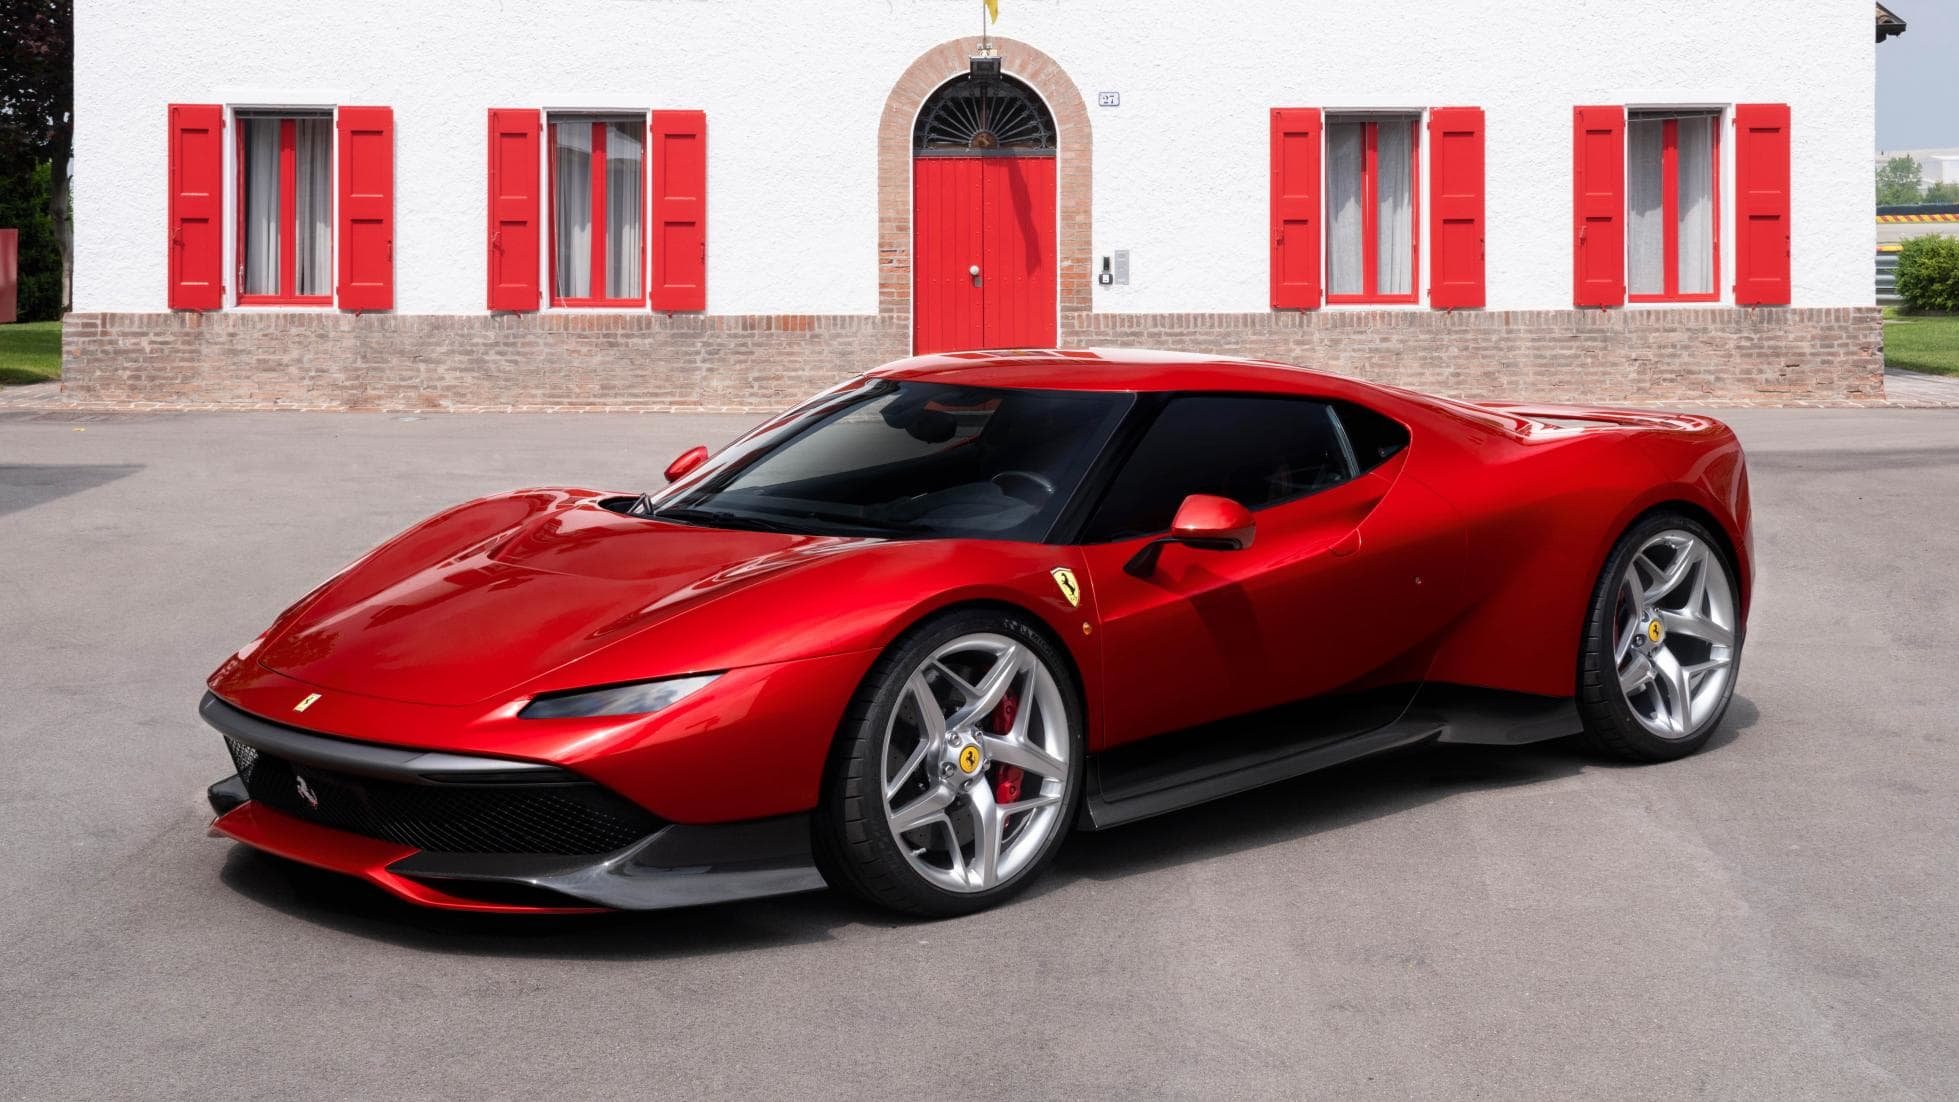 Ferrari has built a 488 GTB-based one-off and it looks absolutely stunning - Luxurylaunches